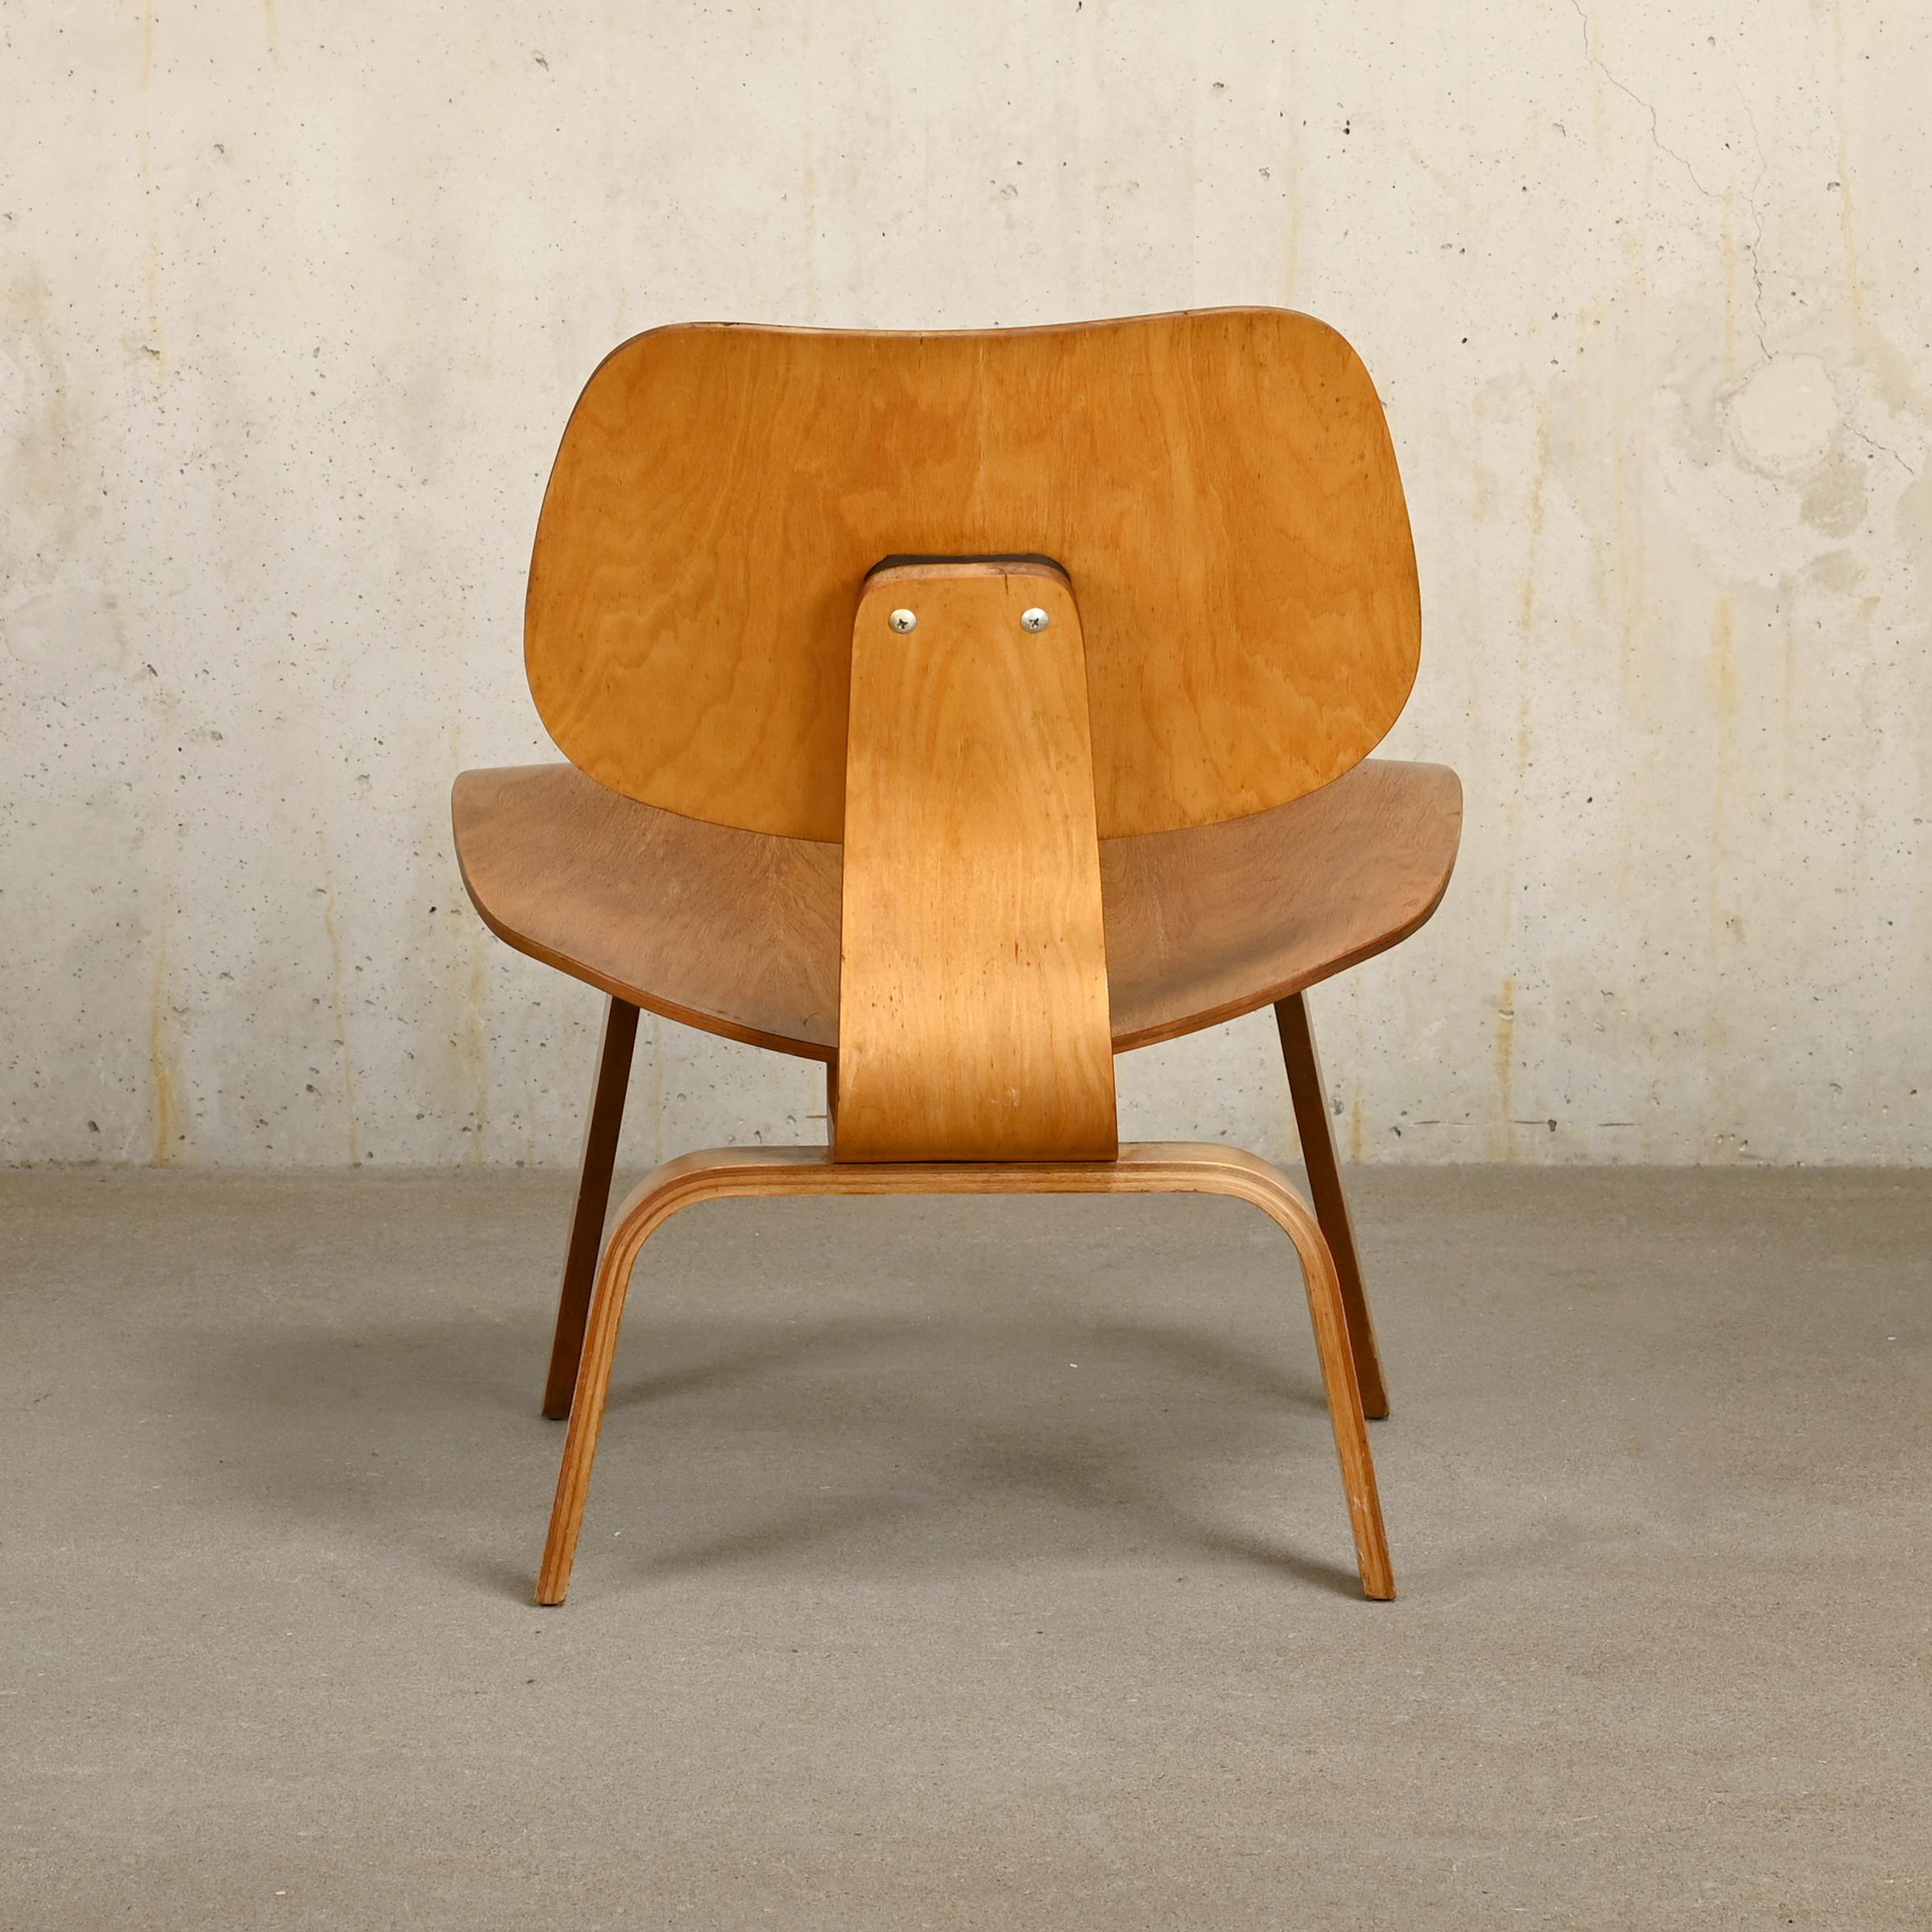 American Charles & Ray Eames vintage LCW Lounge Chair in Ash Plywood for Herman Miller